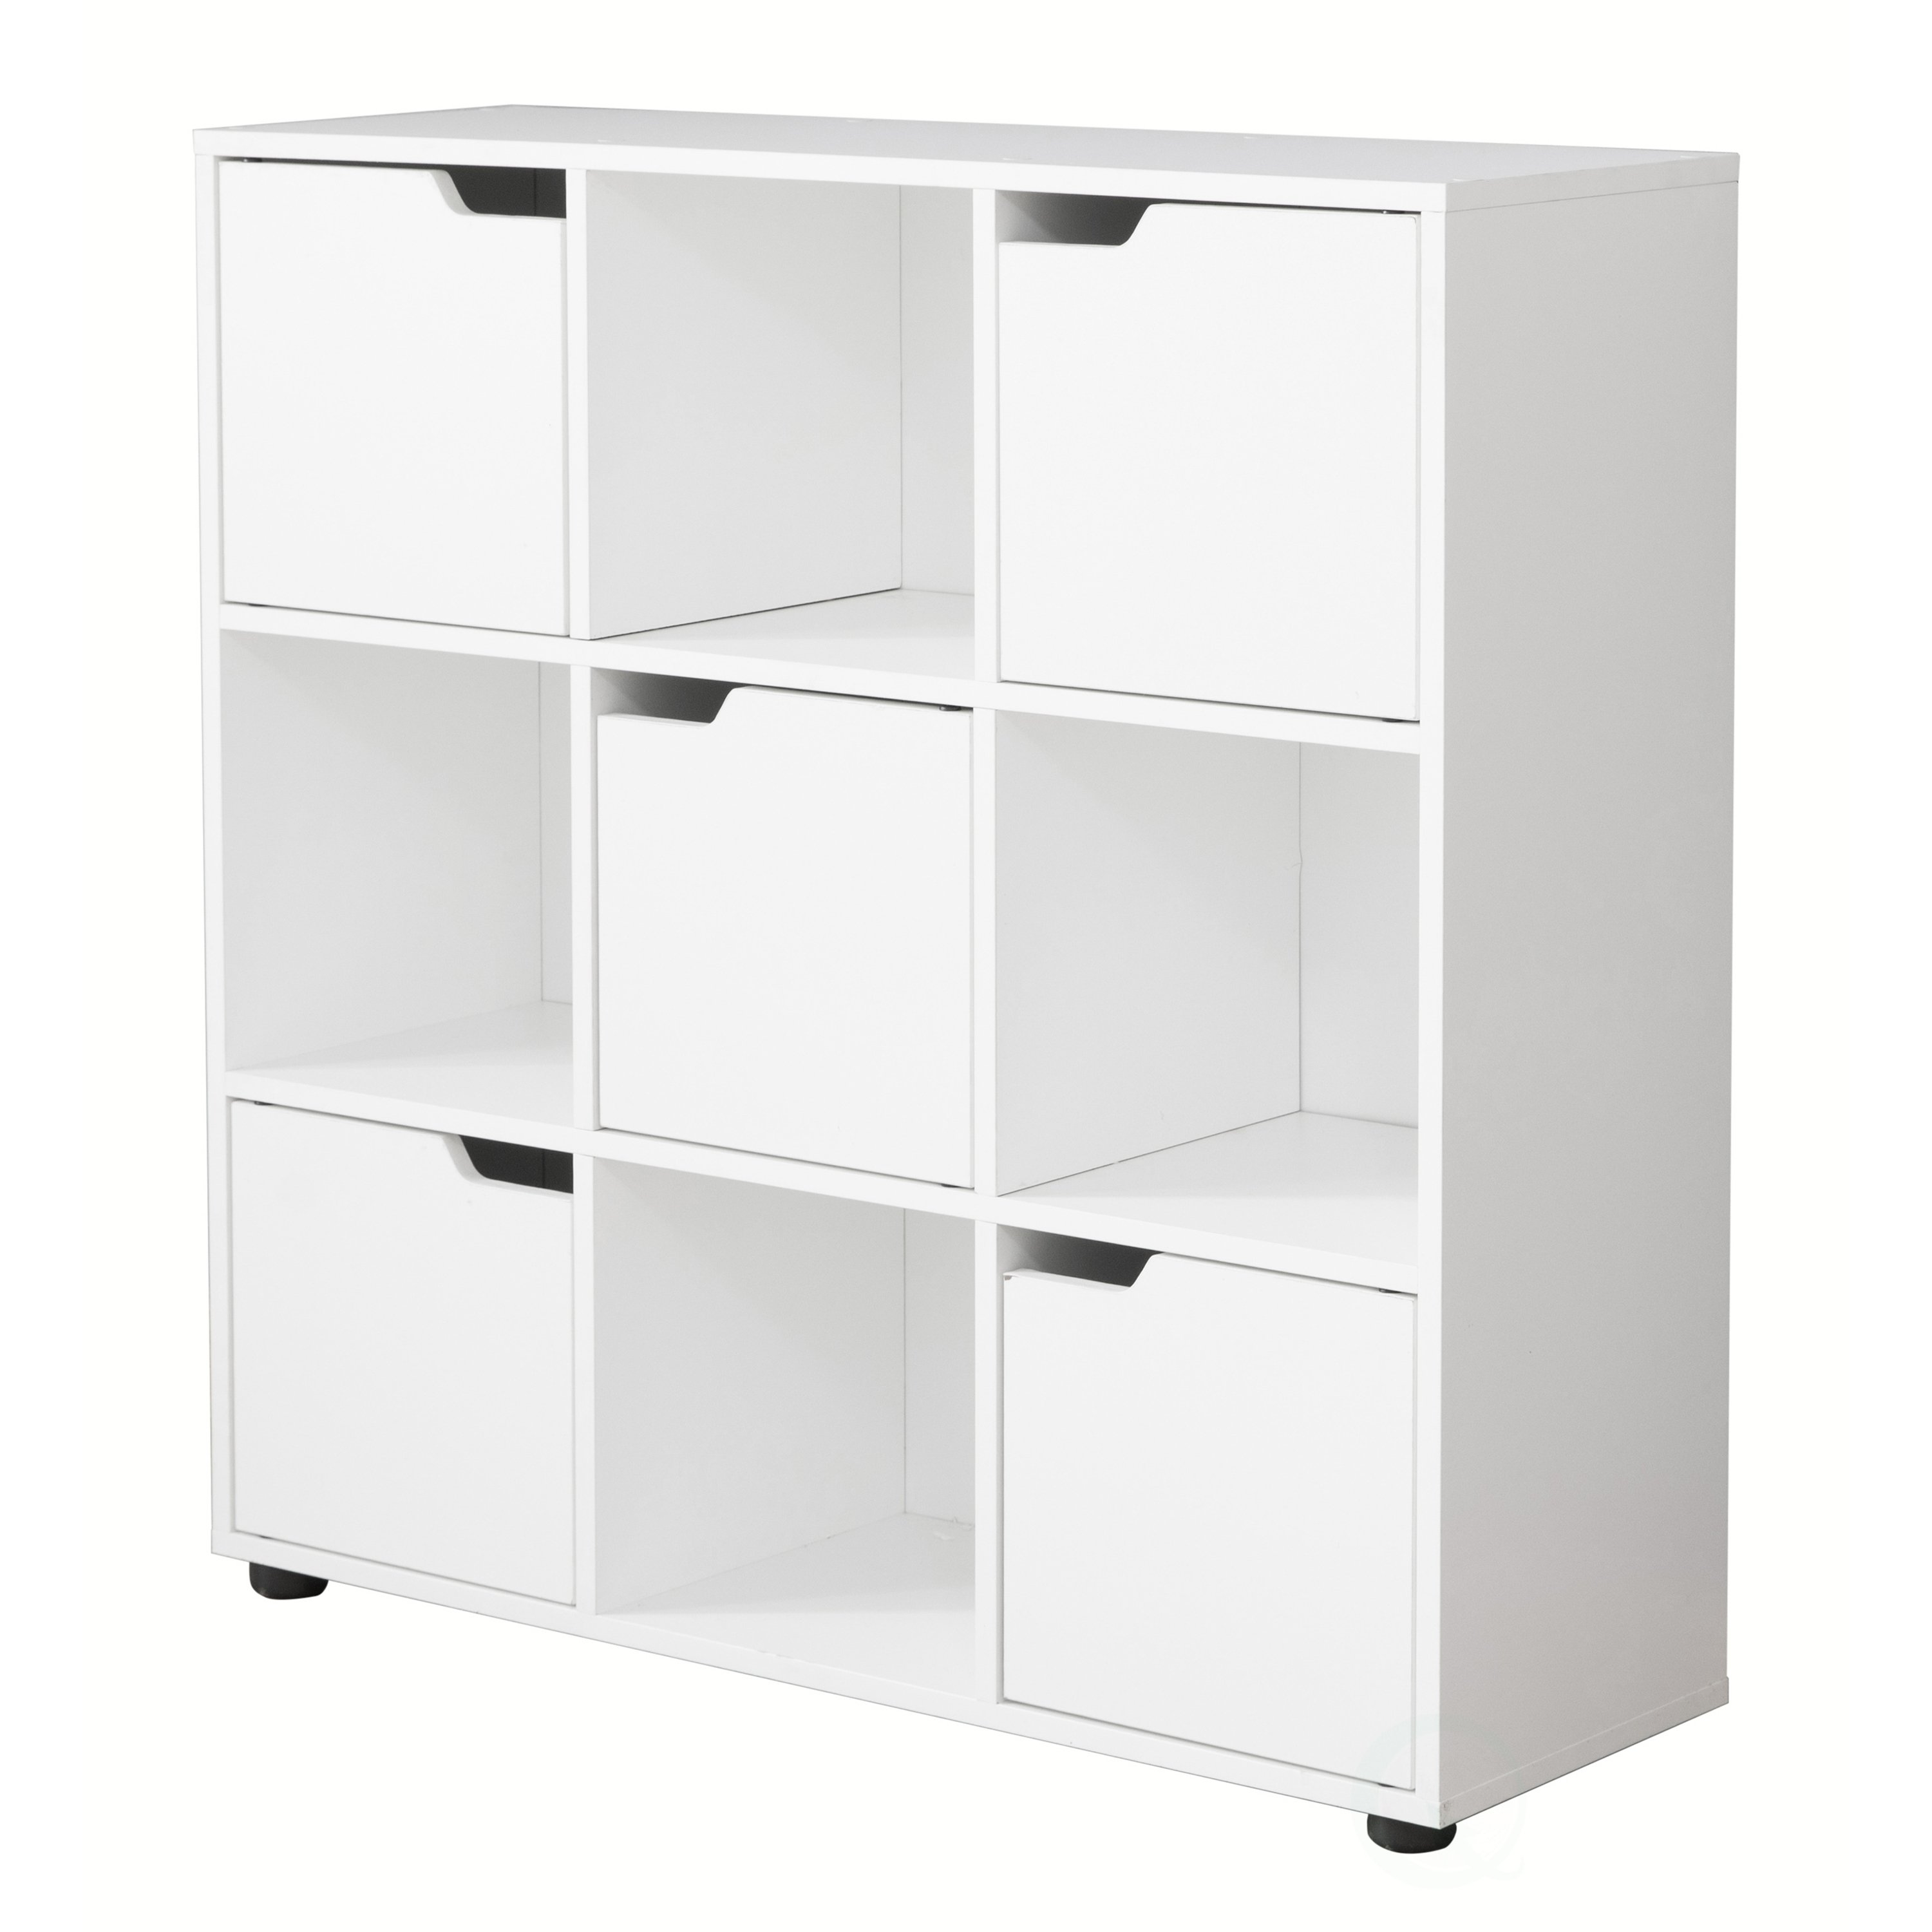 9 Cube Wooden Organizer With 5 Enclosed Doors and 4 Shelves - white